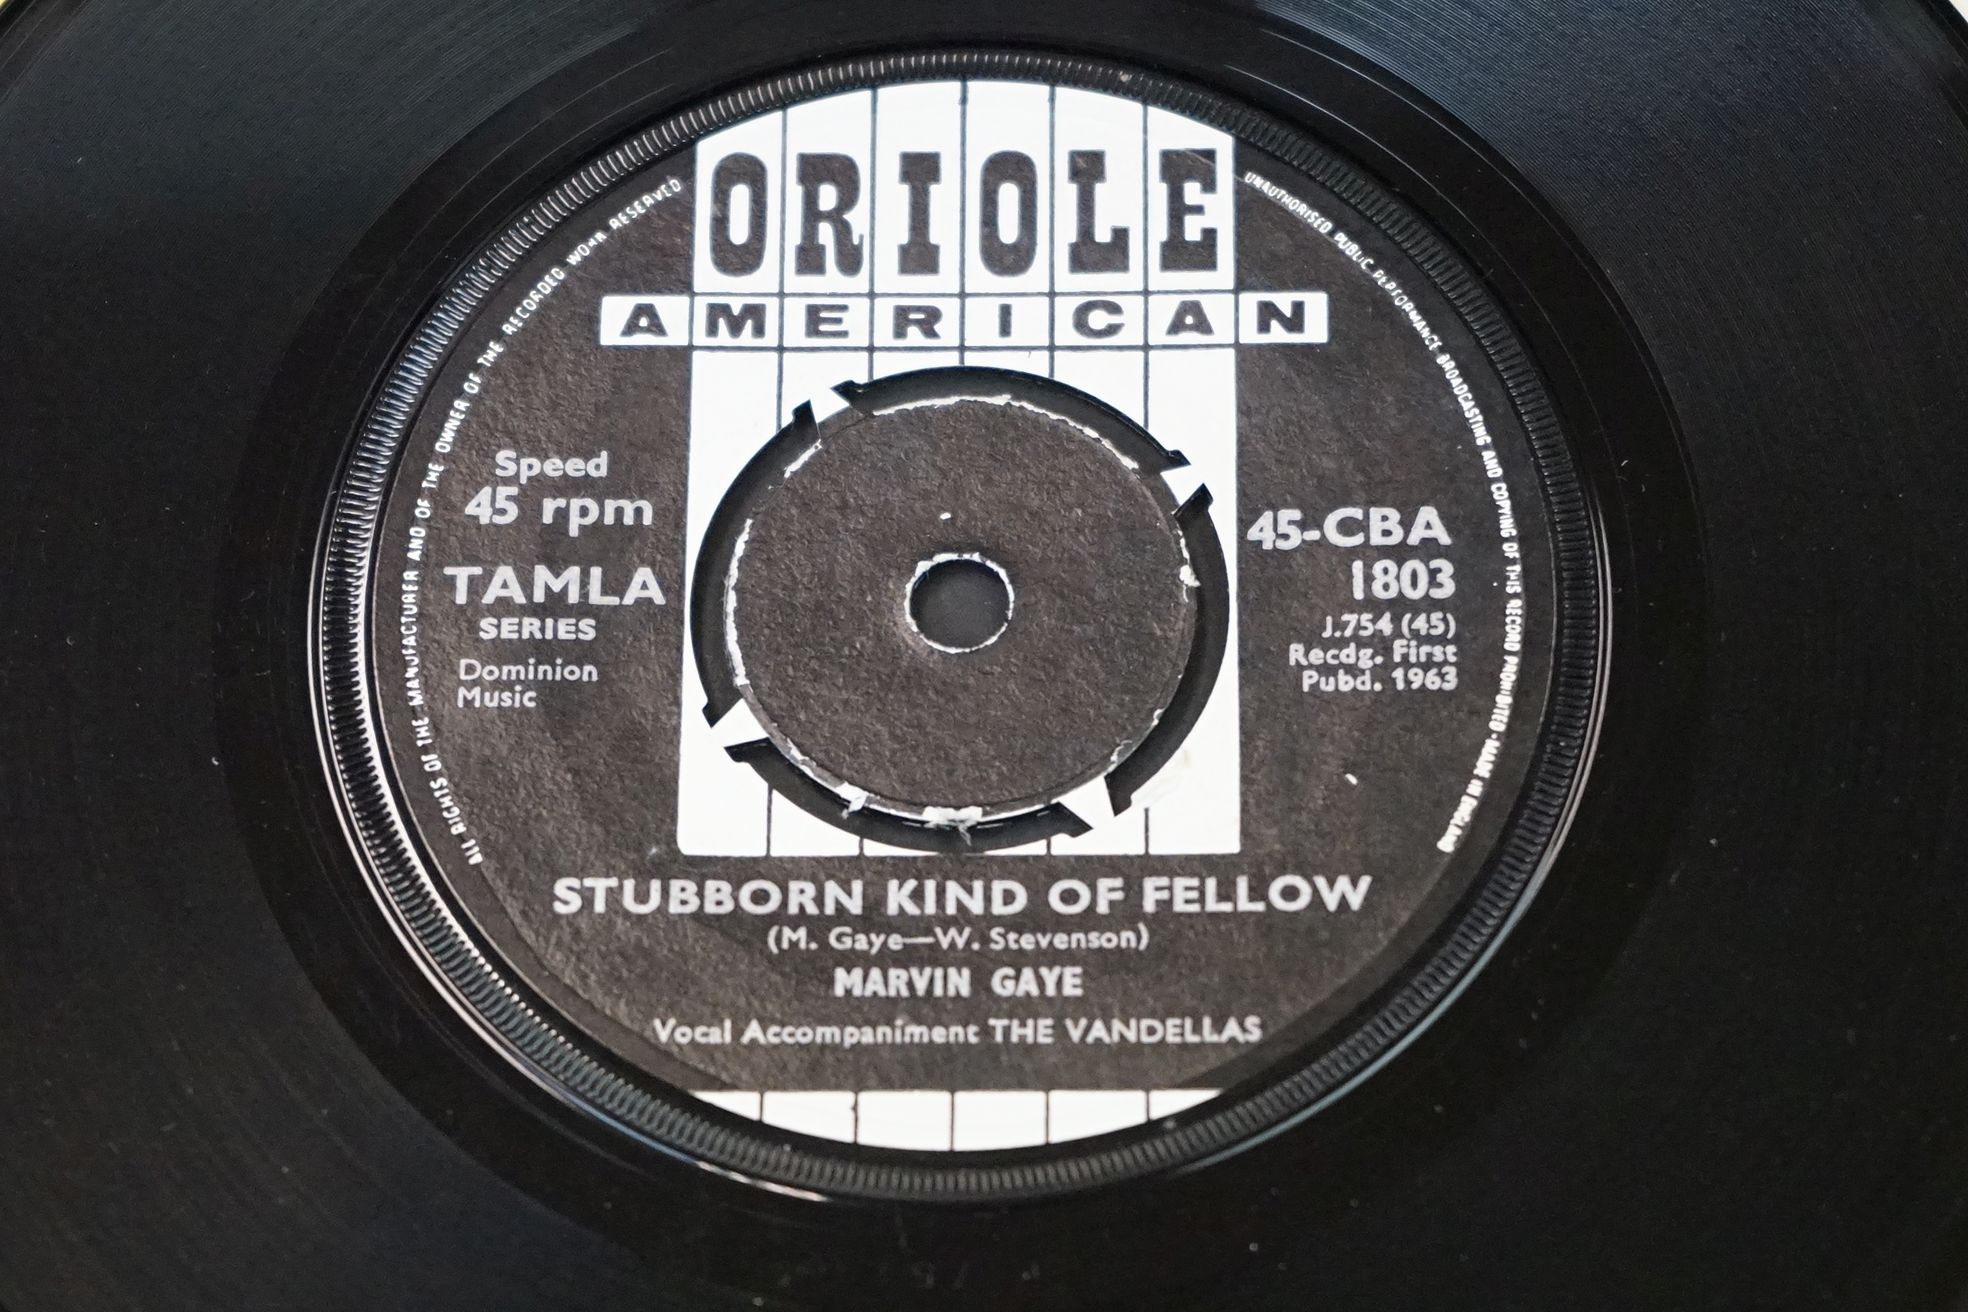 Vinyl - Marvin Gaye Stubborn Kind Of Fellow on Oriole American Records 45-CBA 1803. Vg+ - Image 3 of 6